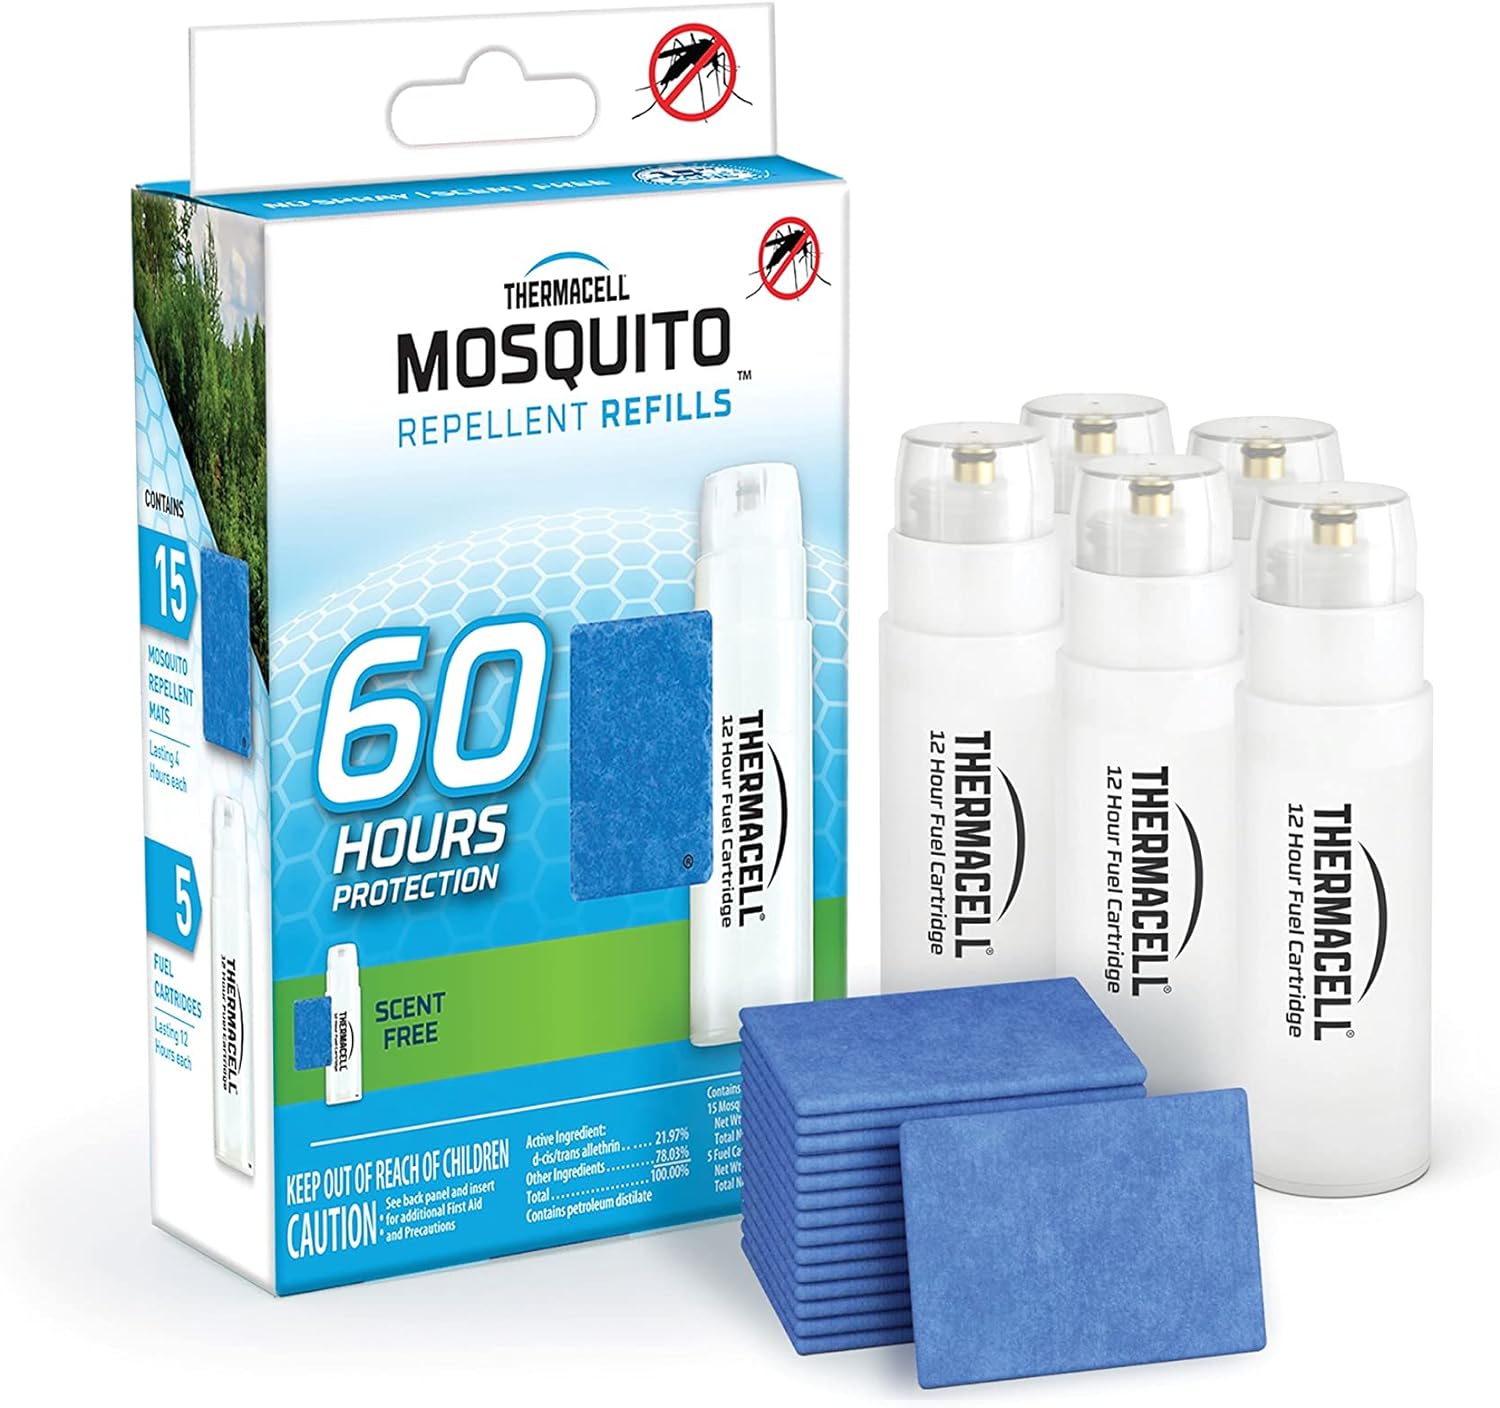 Thermacell Mosquito Repellent Refills w/ 5 Cartridges & 15 Mats $7.94 + Free Shipping w/ Prime or on $35+